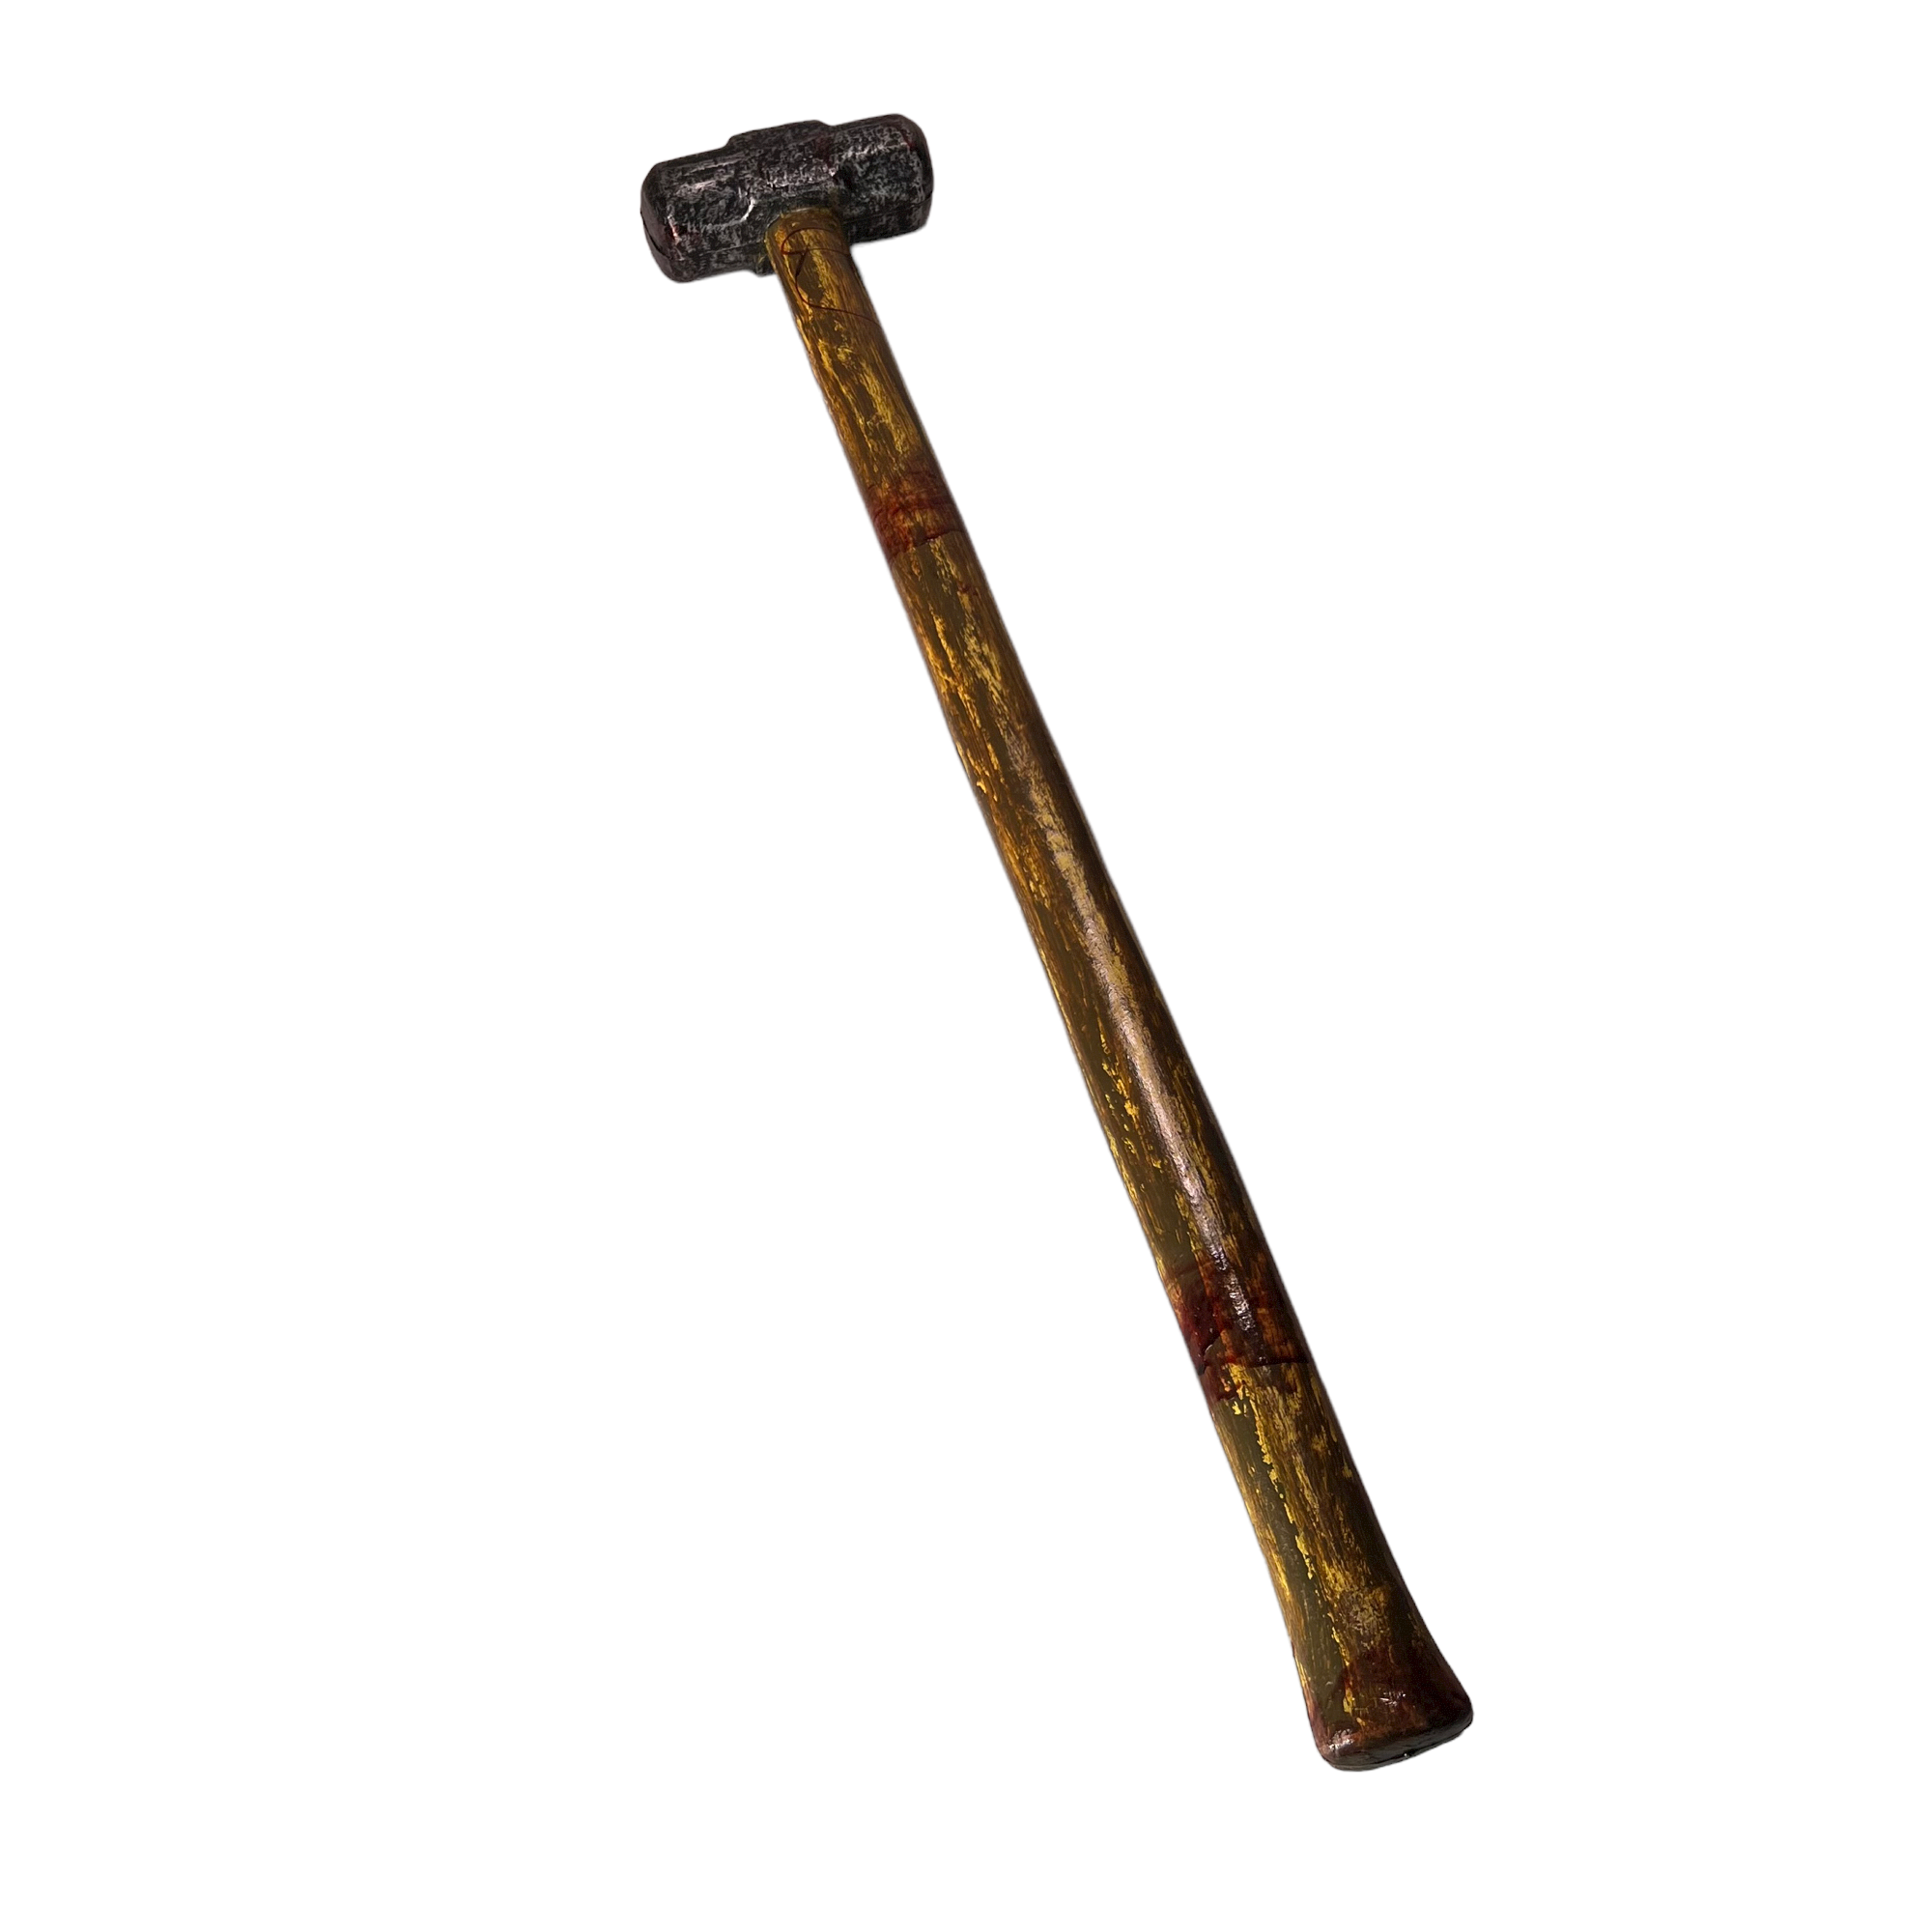 Foam LARGE 34 Inch Rubber Sledgehammer Stunt Prop - BLOODY - Bloodied Silver Head with Aged Handle